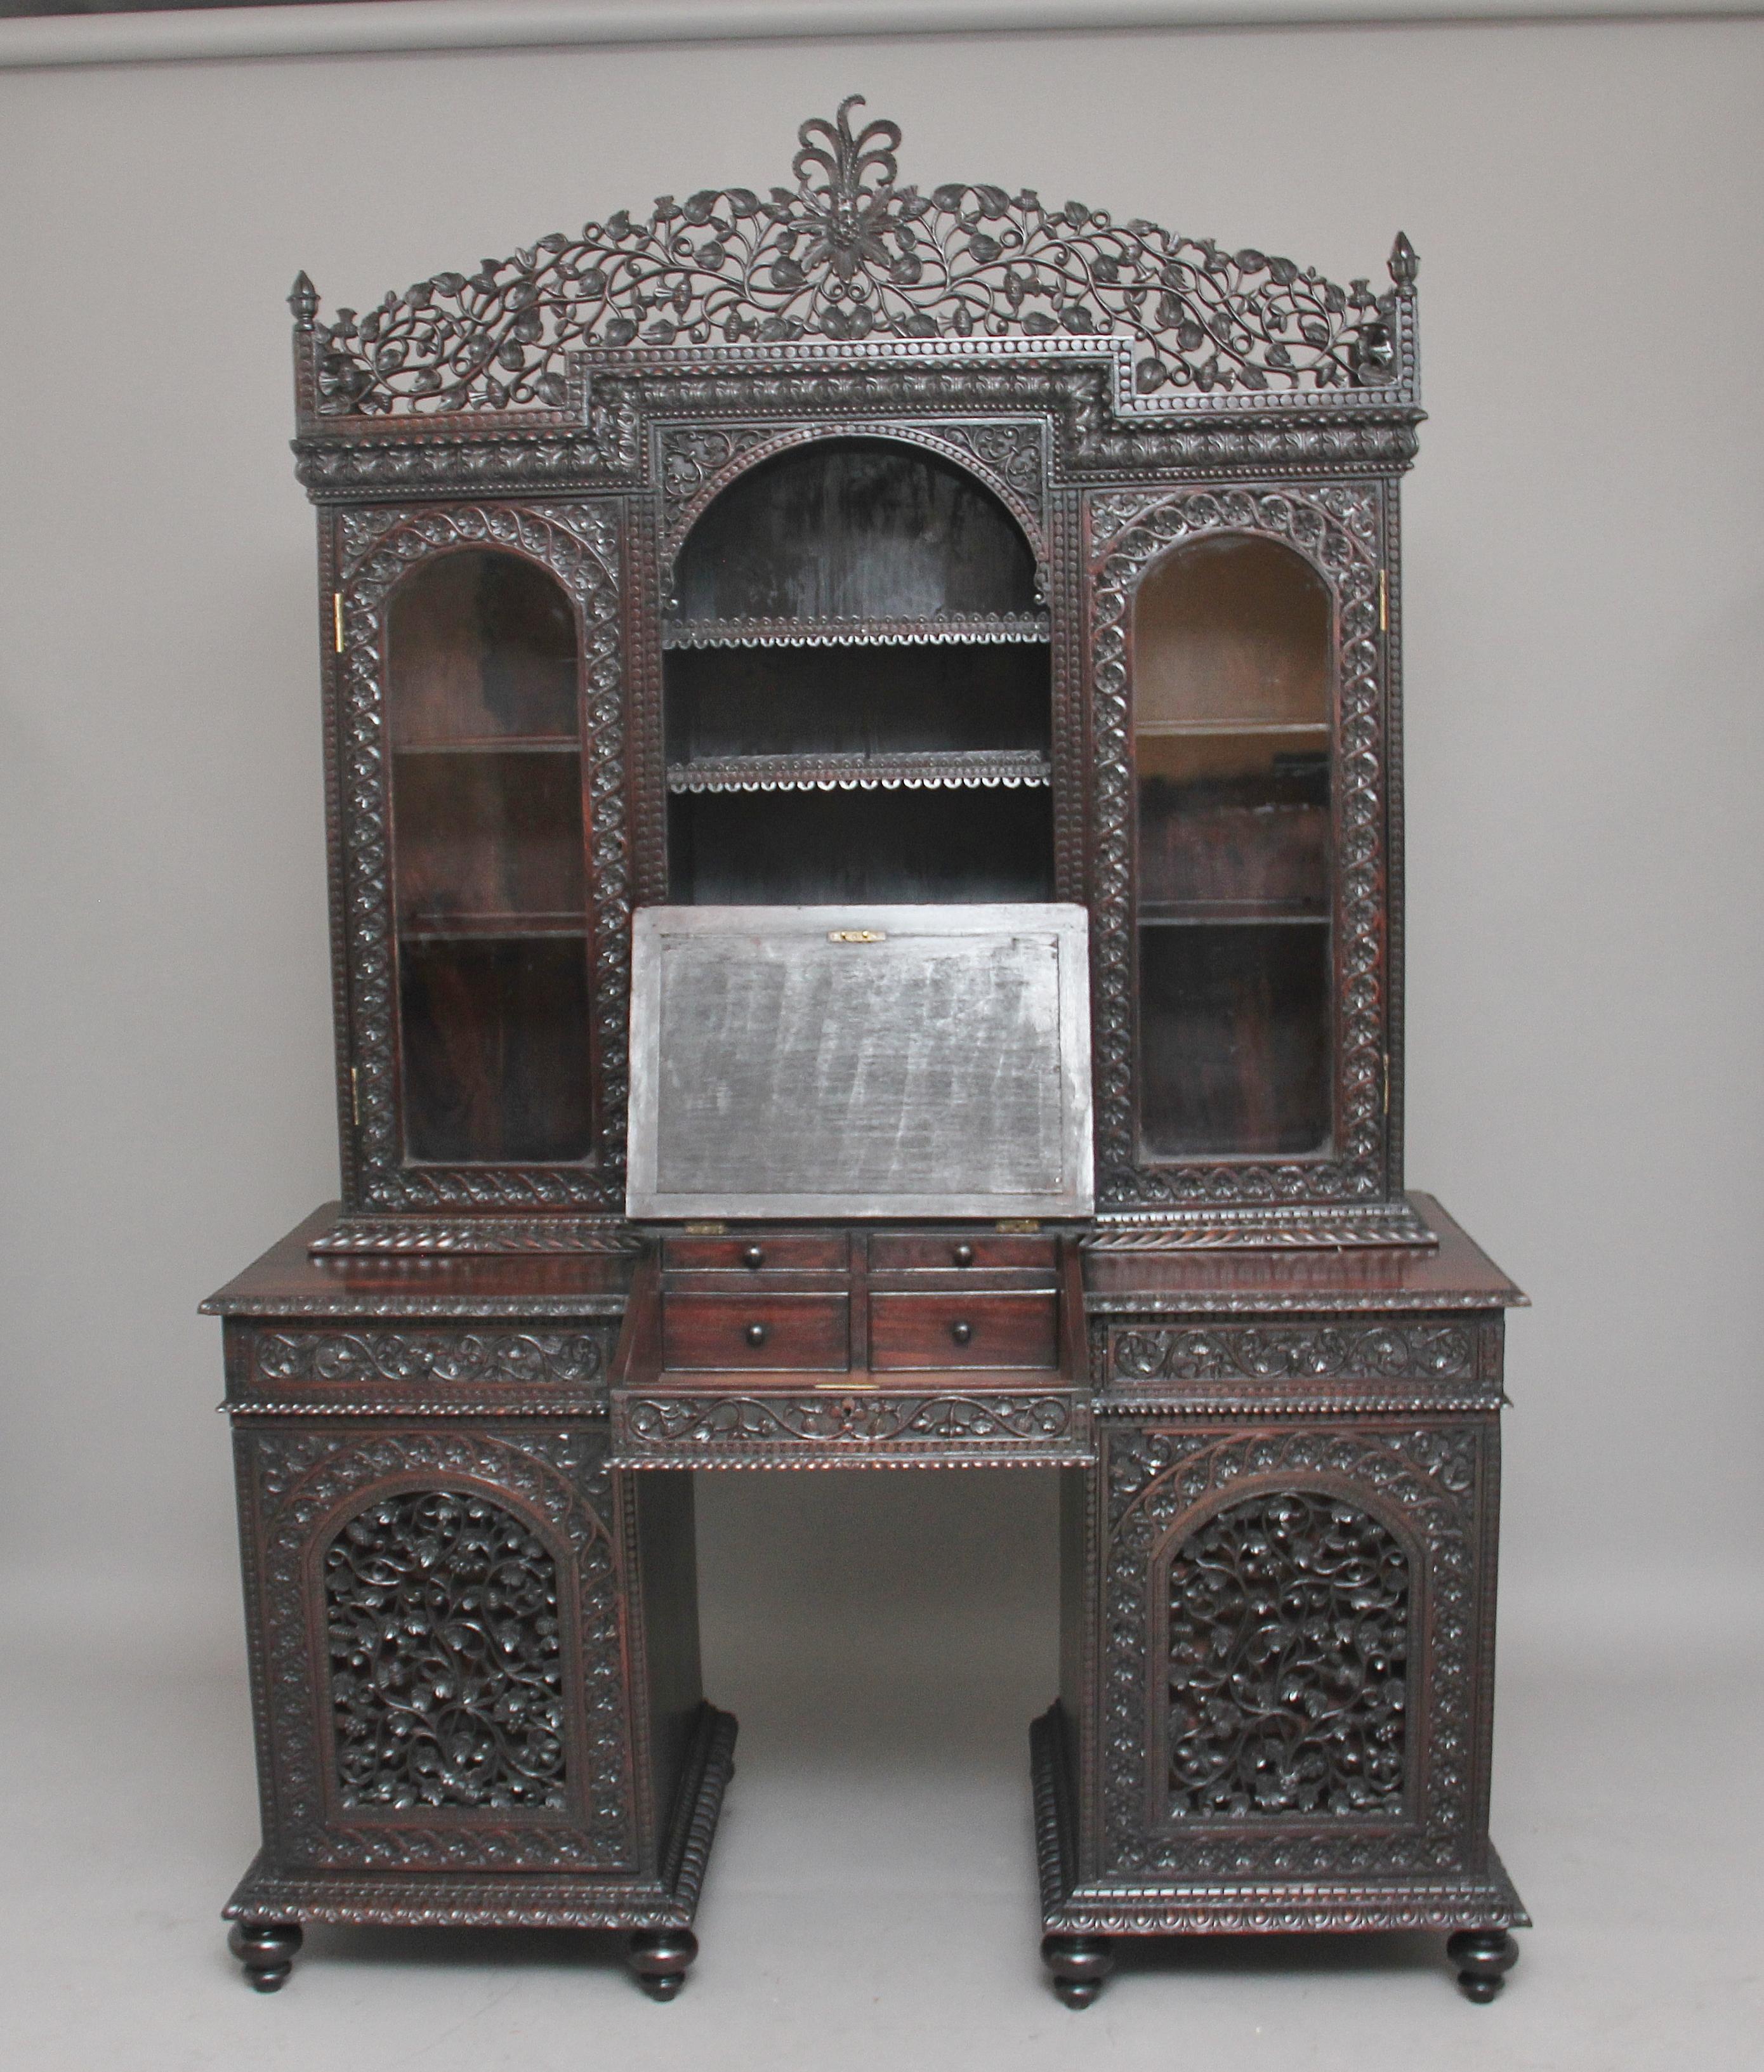 19th century Anglo-Indian hardwood bookcase desk, the base having two pedestals on turned feet, each pedestal with a heavily carved and pierced fret door which opens to reveal three drawers, above the pedestals is a section with two drawers flanking